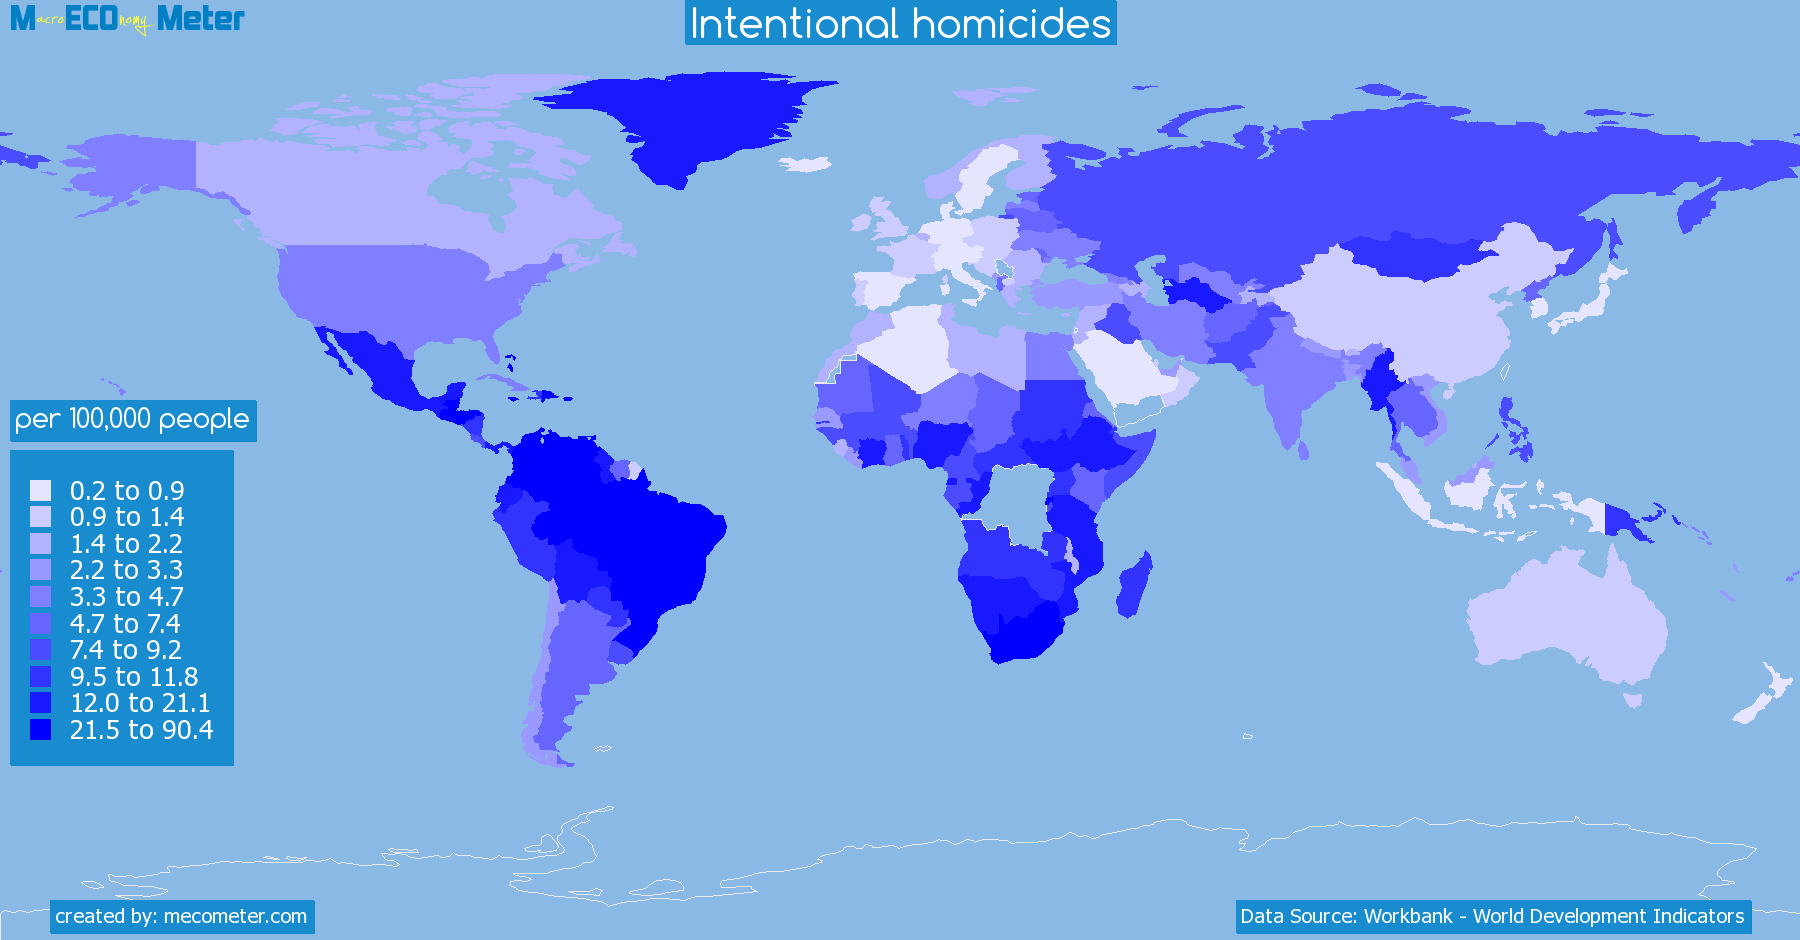 Worldmap of all countries colored to reflect the values of Intentional homicides